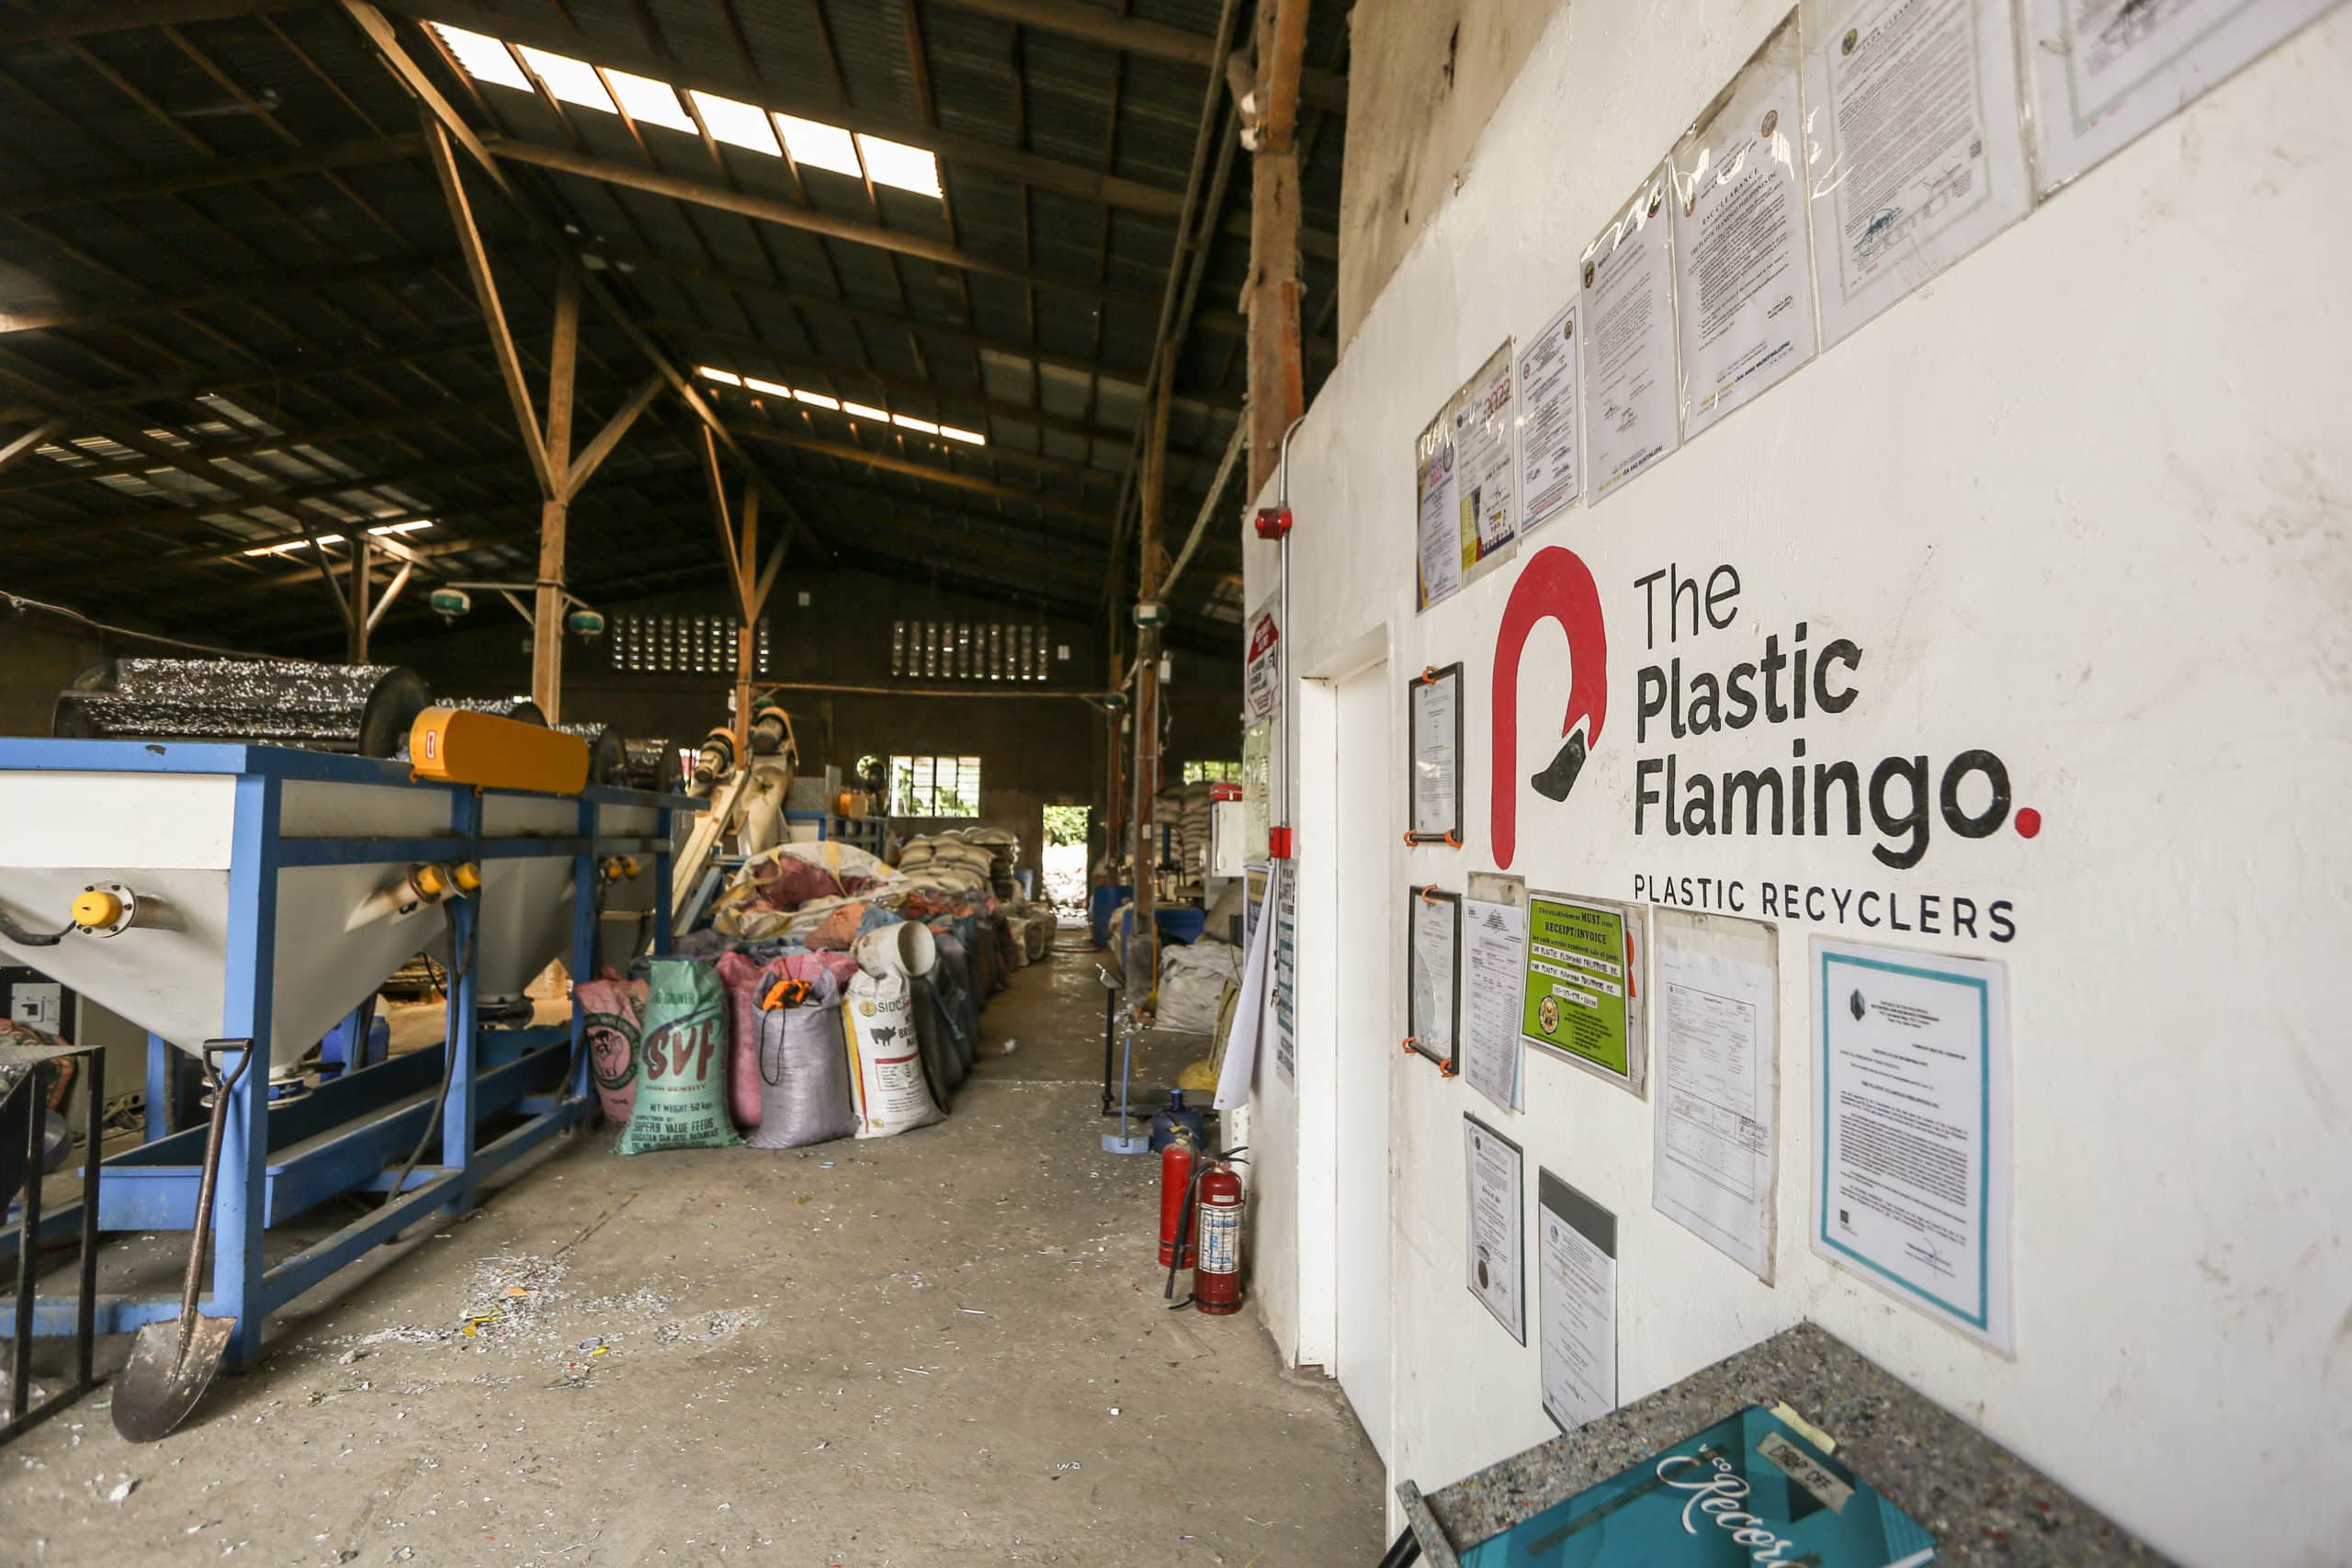 From the inside of the workshop - The plastic flamingo plastic recyclers